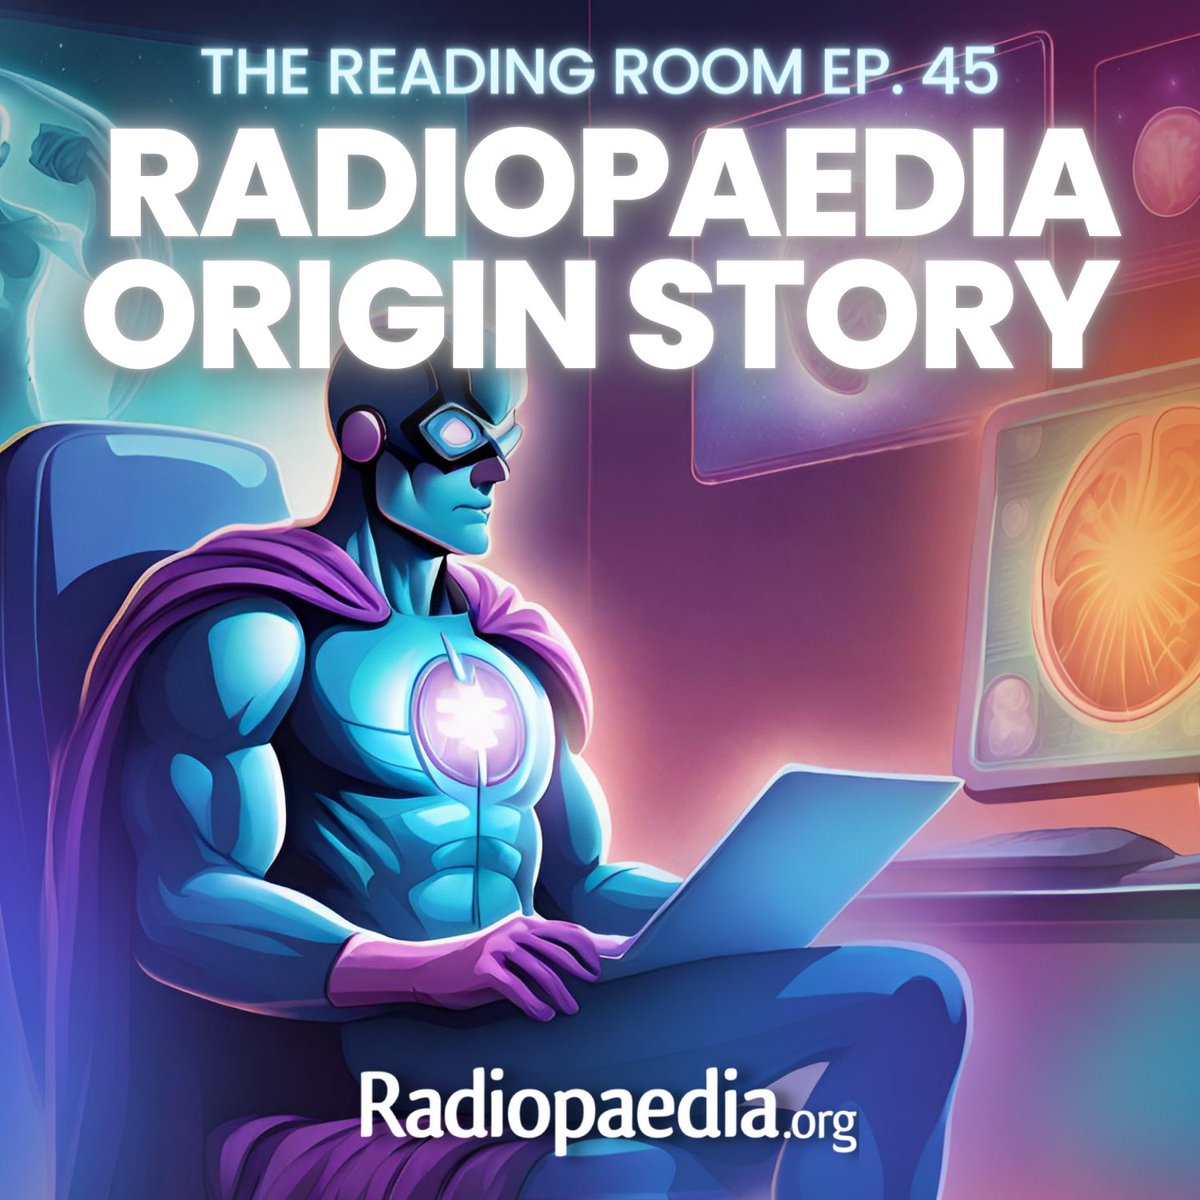 Ever wondered how @Radiopaedia came to be? From an elaborate procrastination exercise to 25 million page views a month, @frankgaillard recounts the rise of Radiopaedia and the philosophy behind it in this special @RadCastAcademy interview! 🎧 radiopaedia.org/podcast